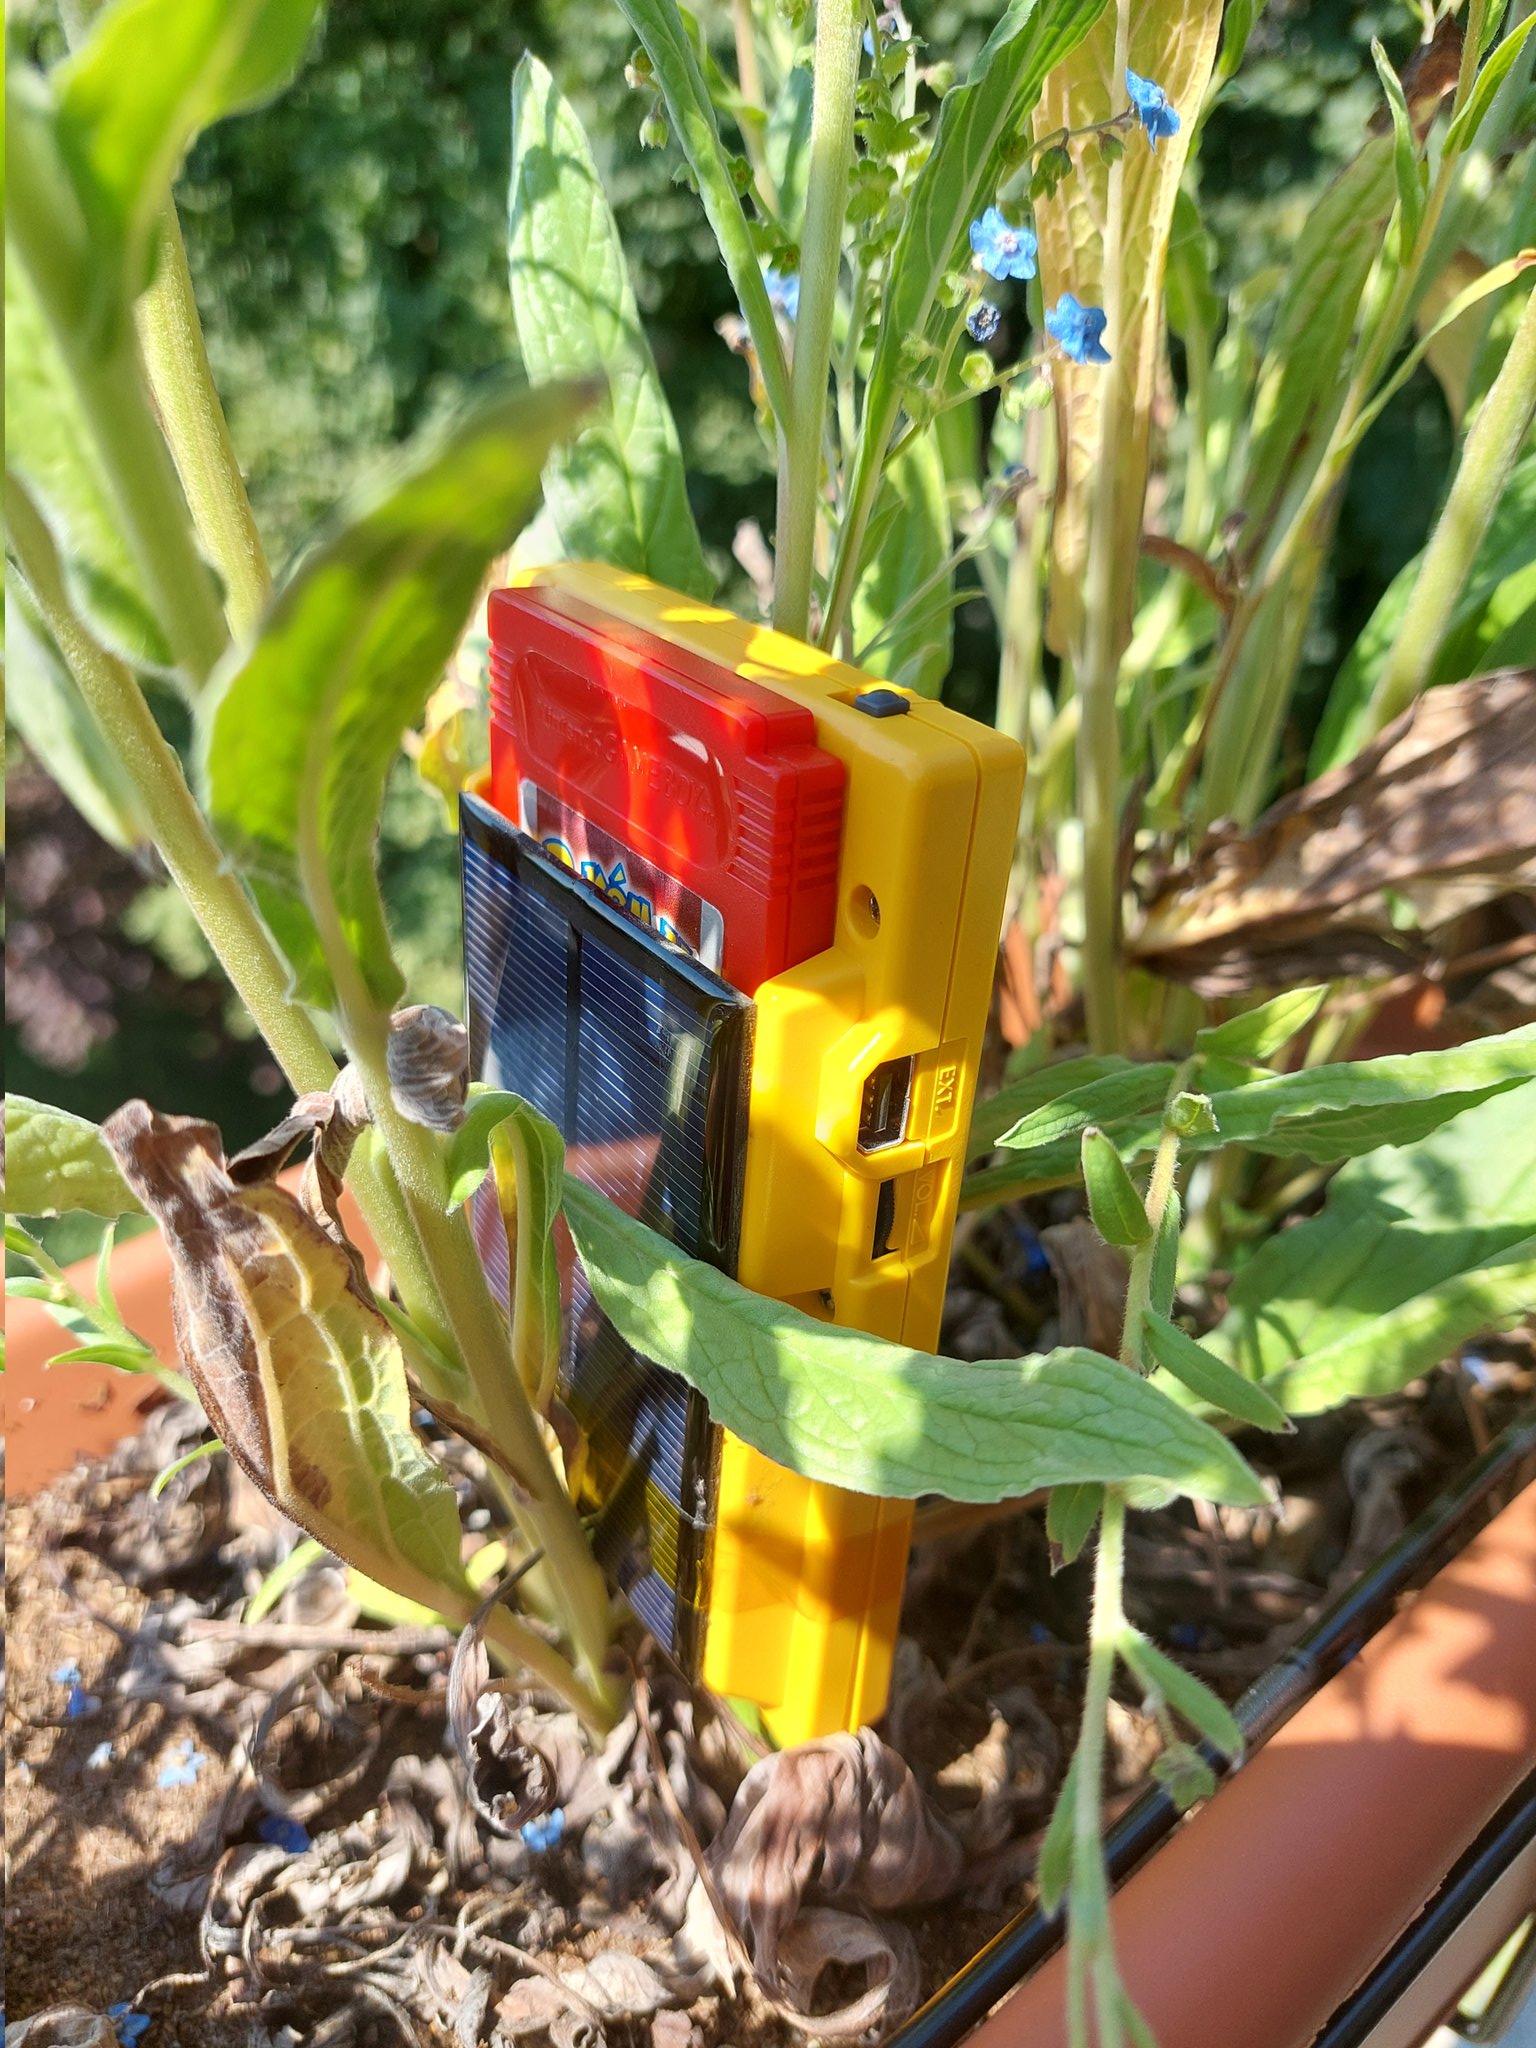 A solar powered game boy sitting amidst some plants